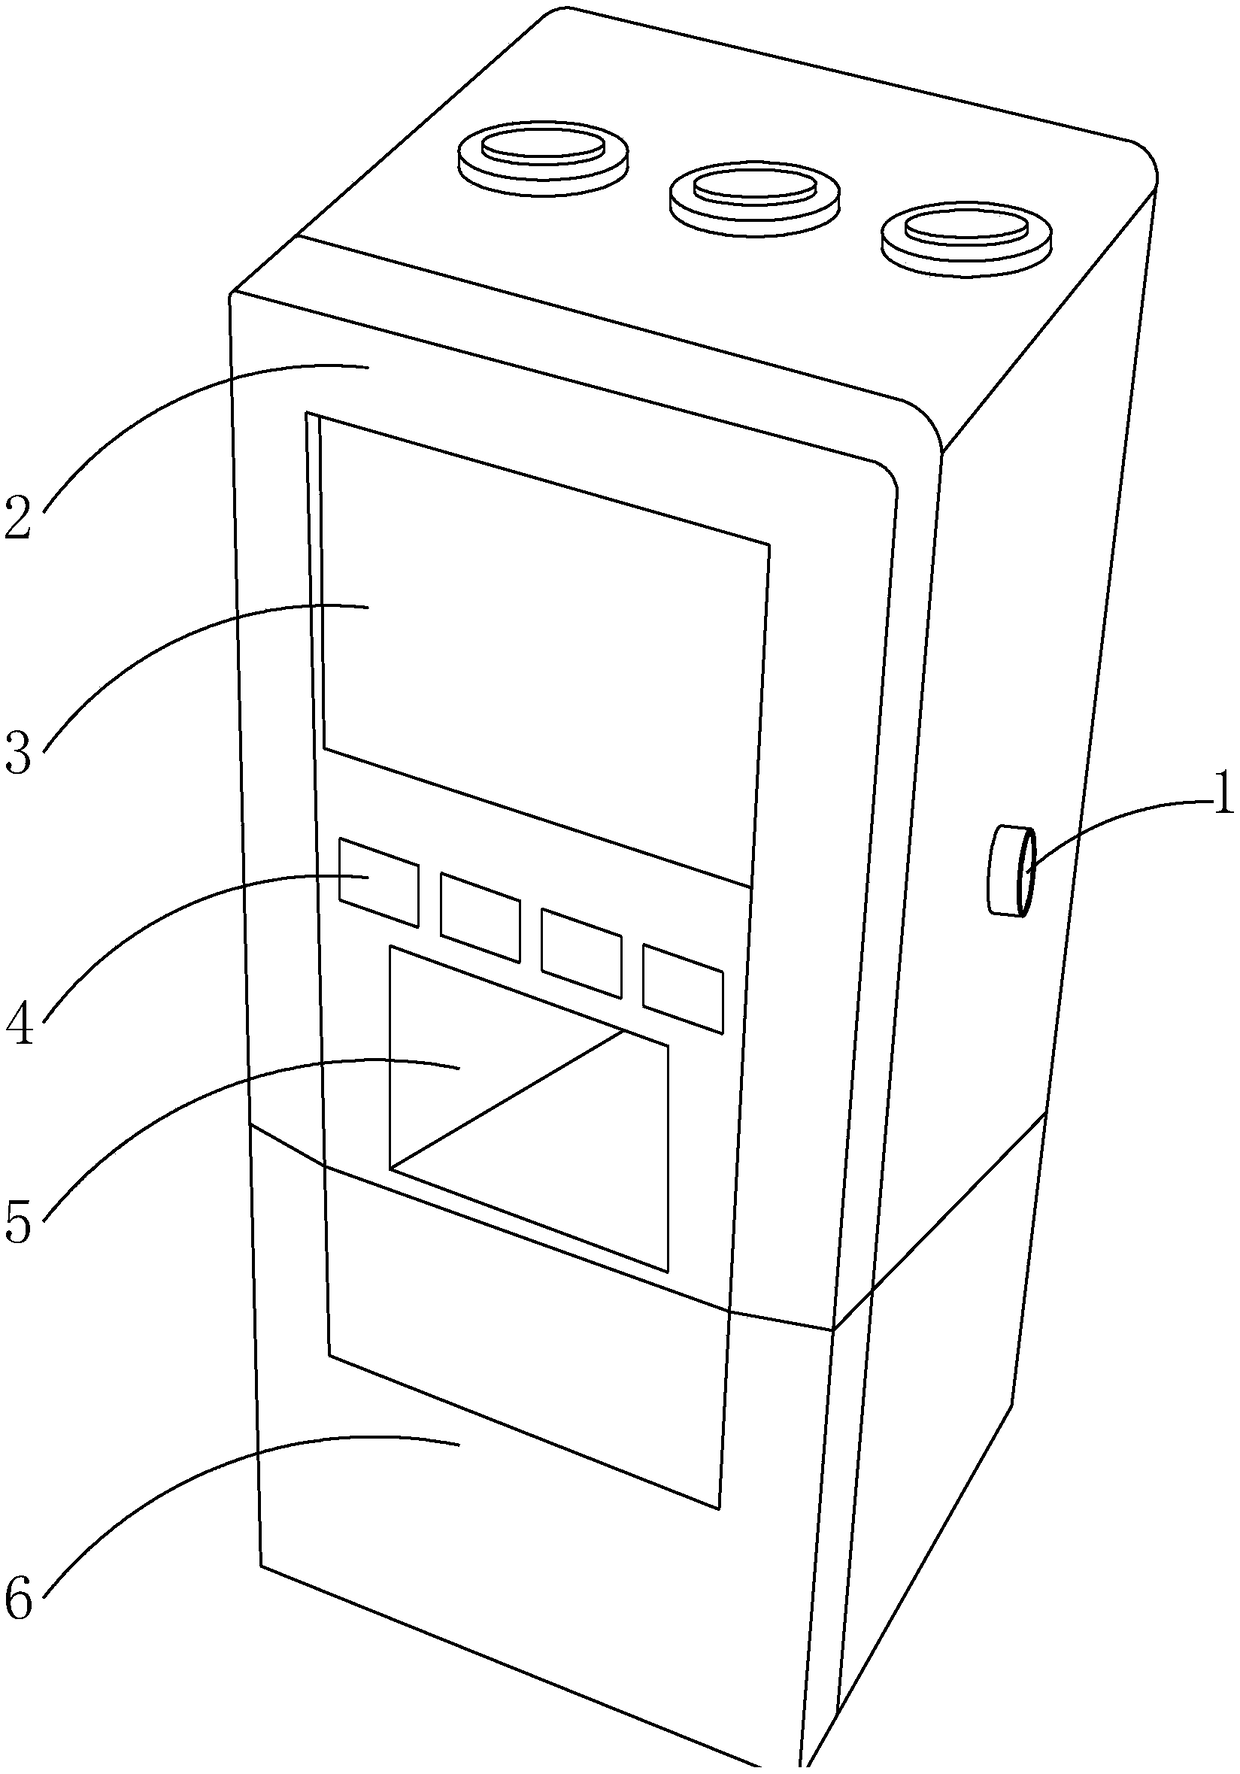 Spiral-guiding carbonated beverage layering device